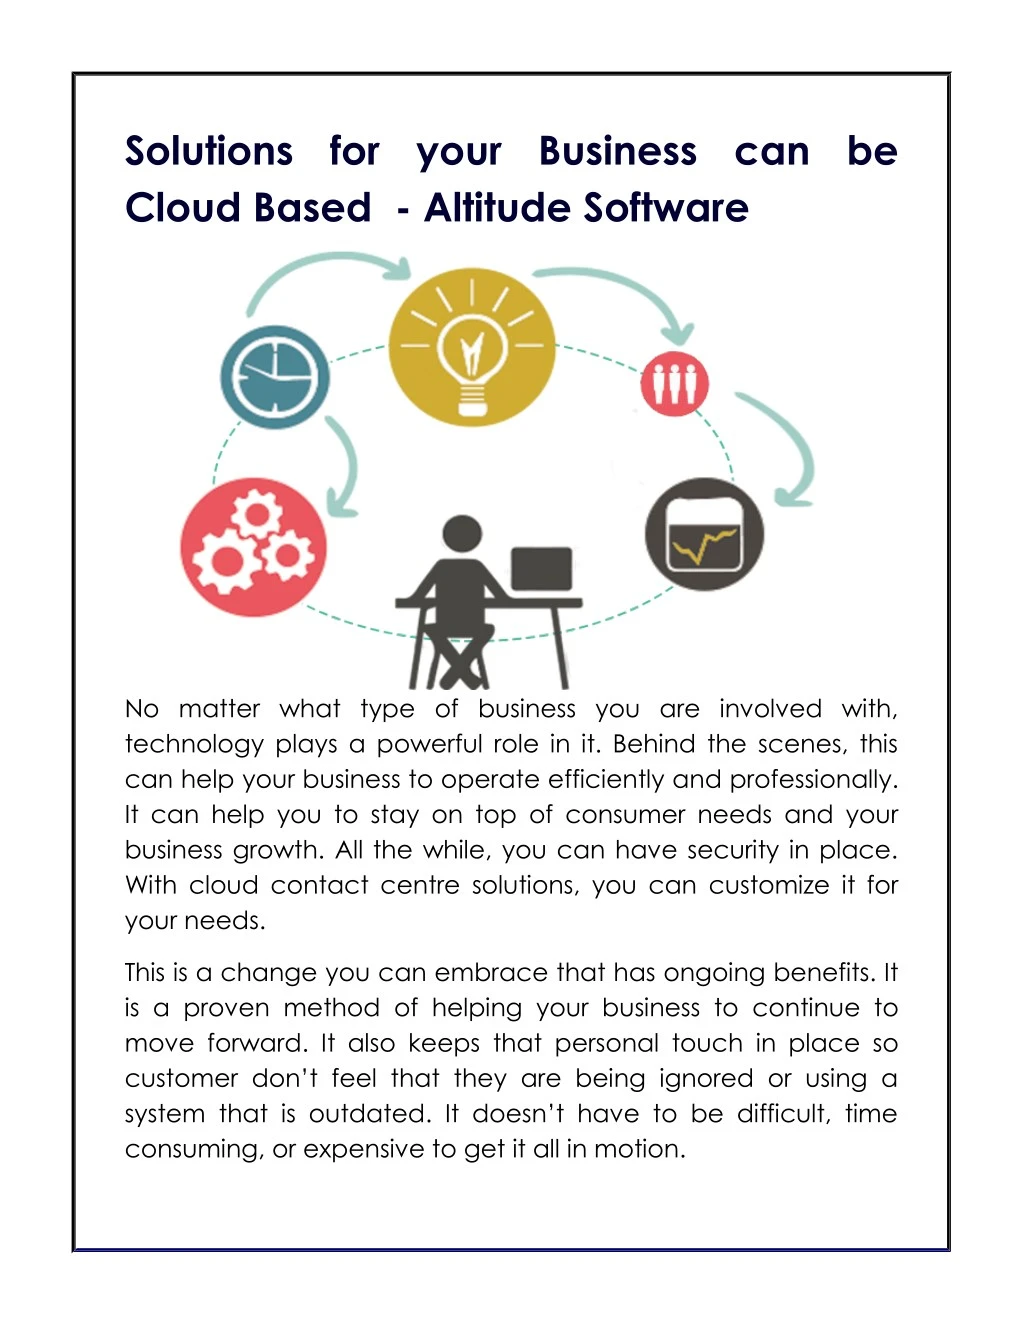 solutions for your business can be cloud based